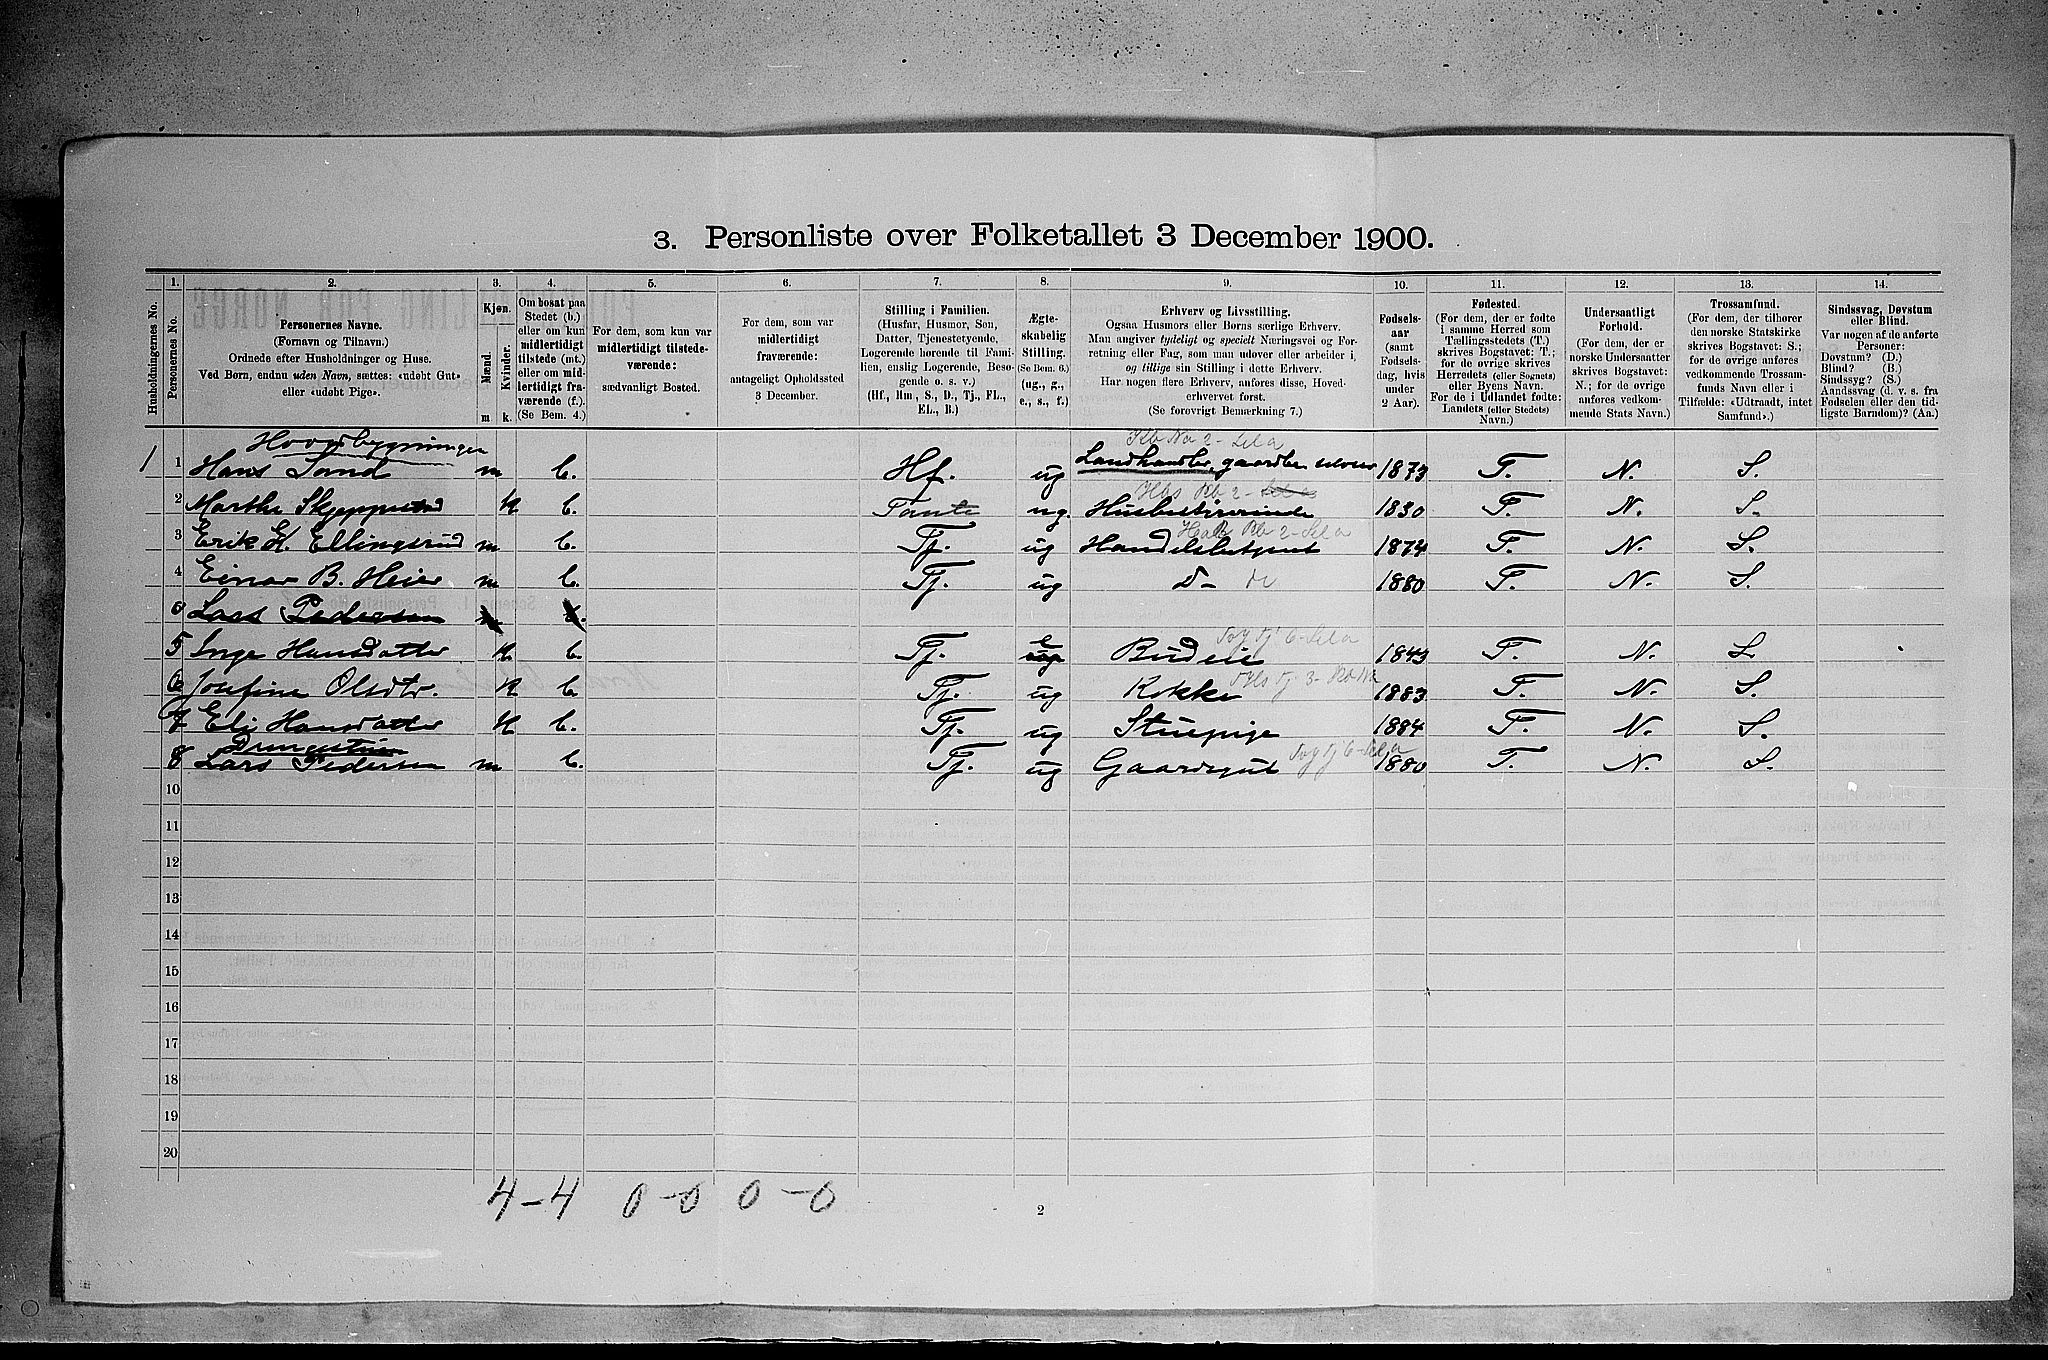 SAH, 1900 census for Nord-Odal, 1900, p. 700